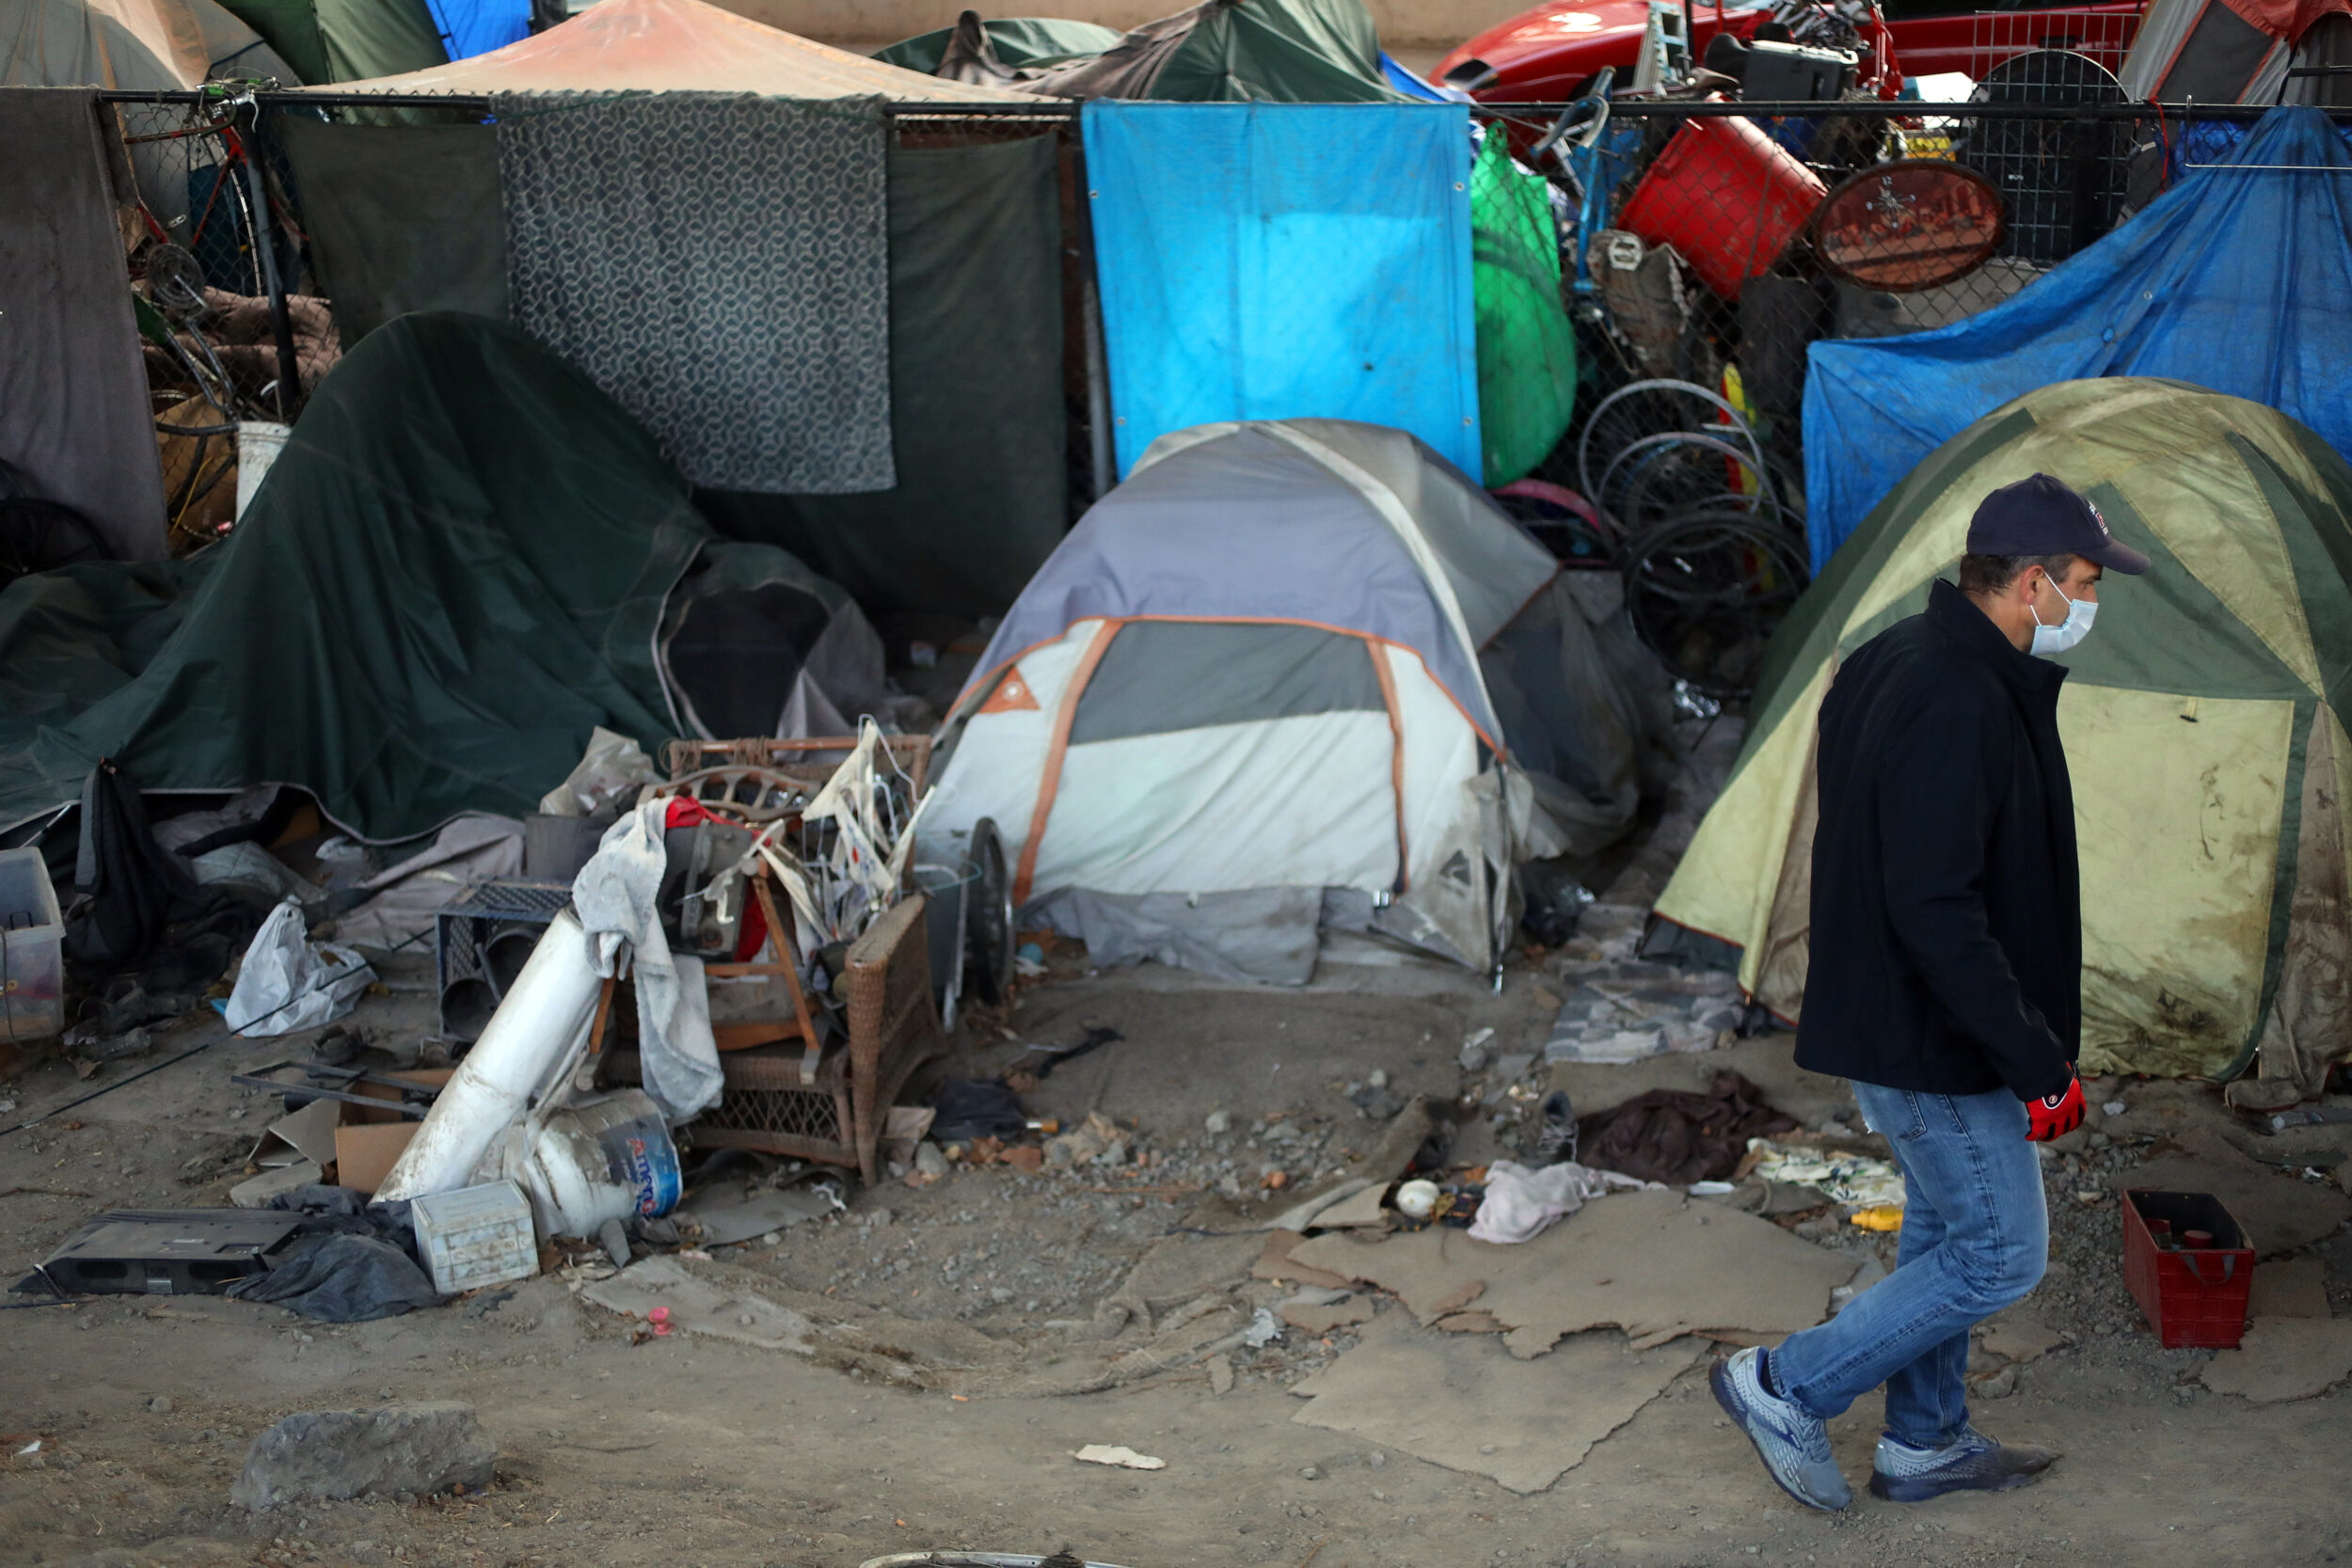 A man in jeans and a jacket passes a row of tents on the street.